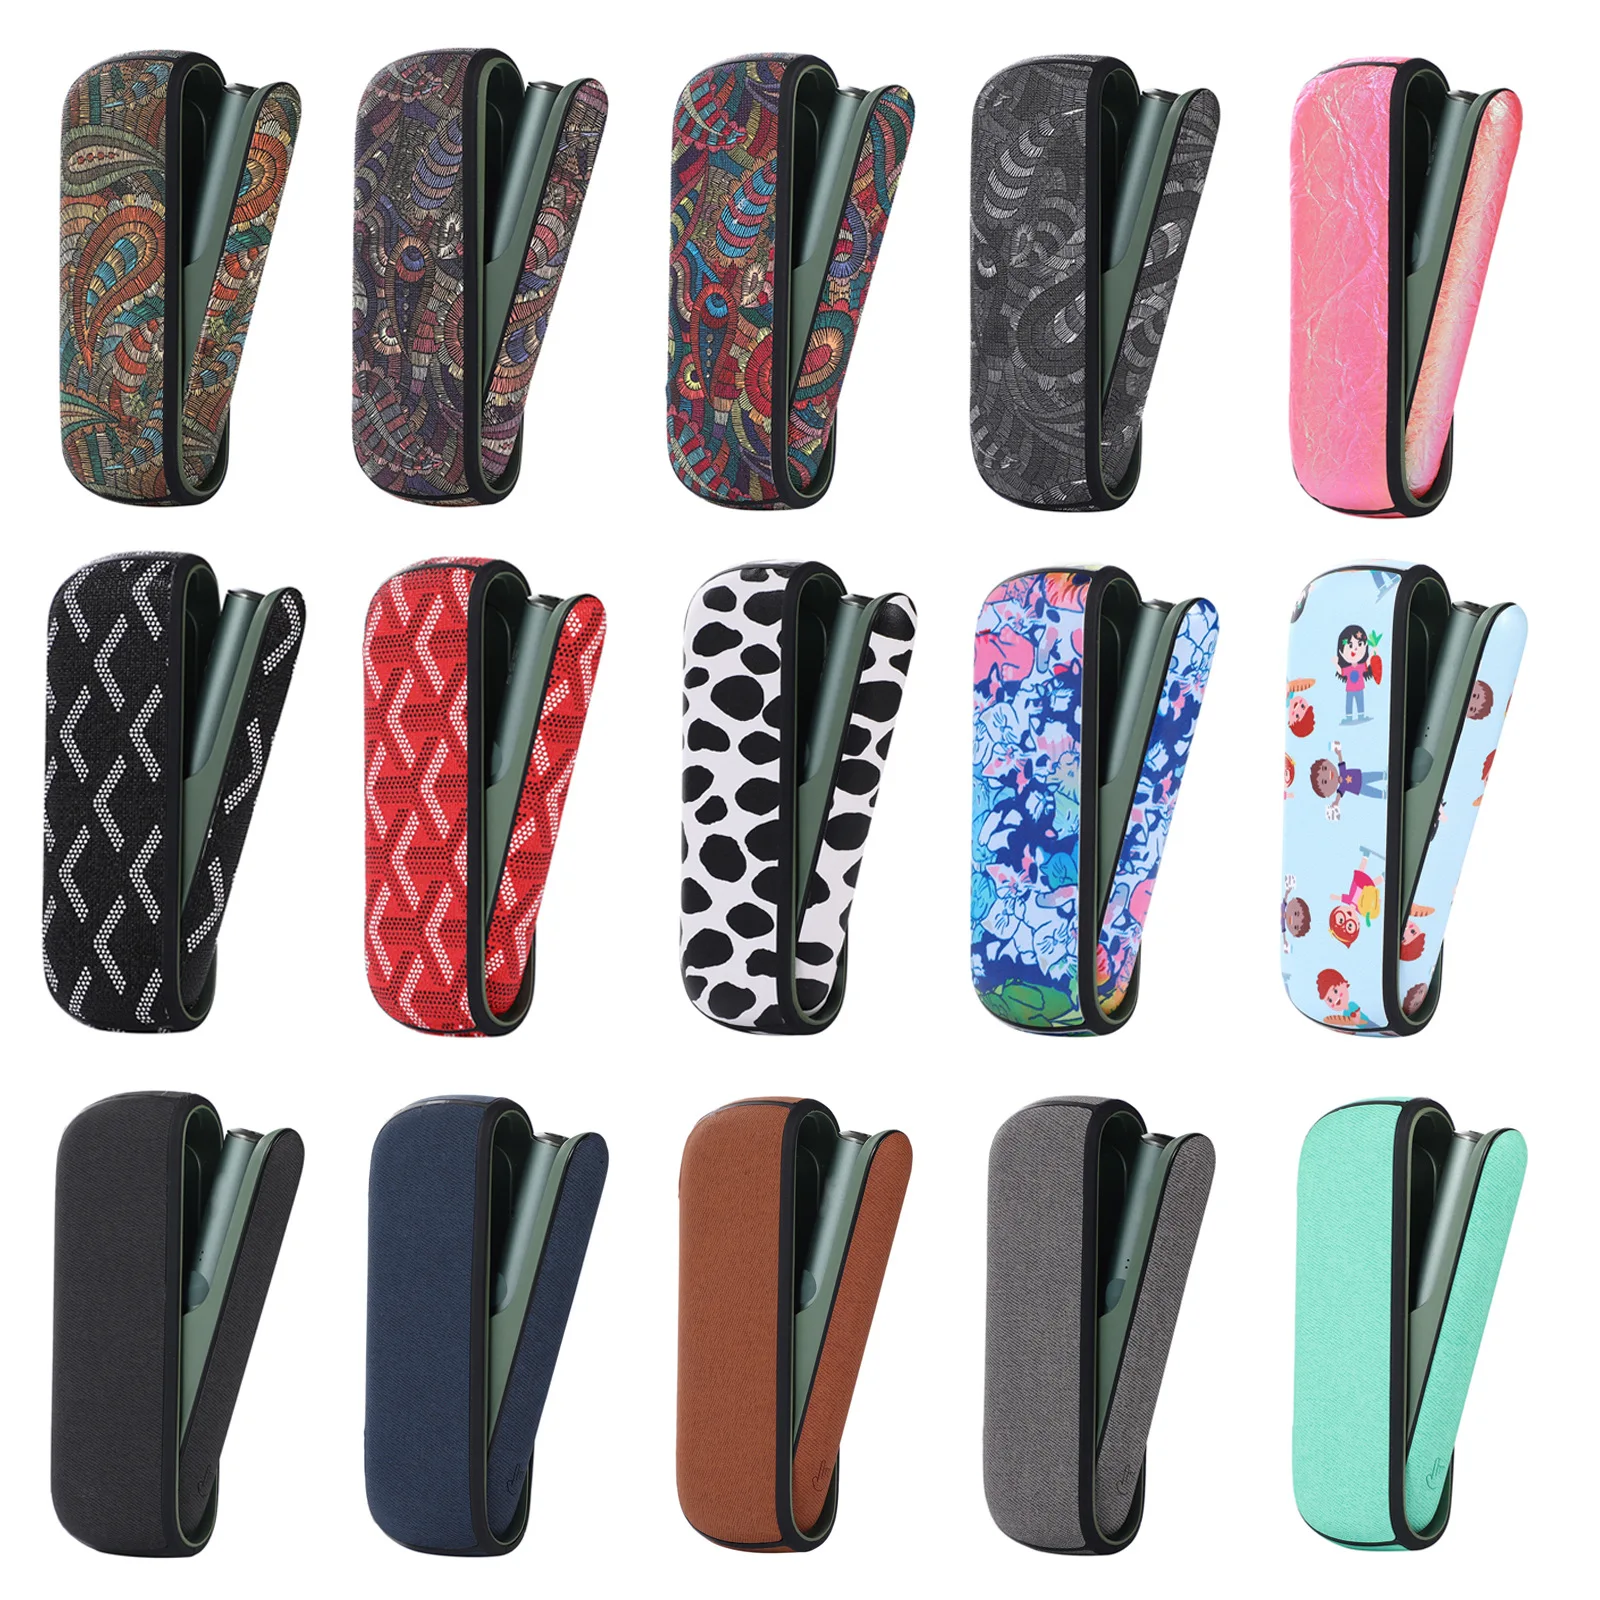 13 Colors PU Case for IQOS ILUMA with Door Cover for IQOS 4 ILUMA  Protection Case Accessories